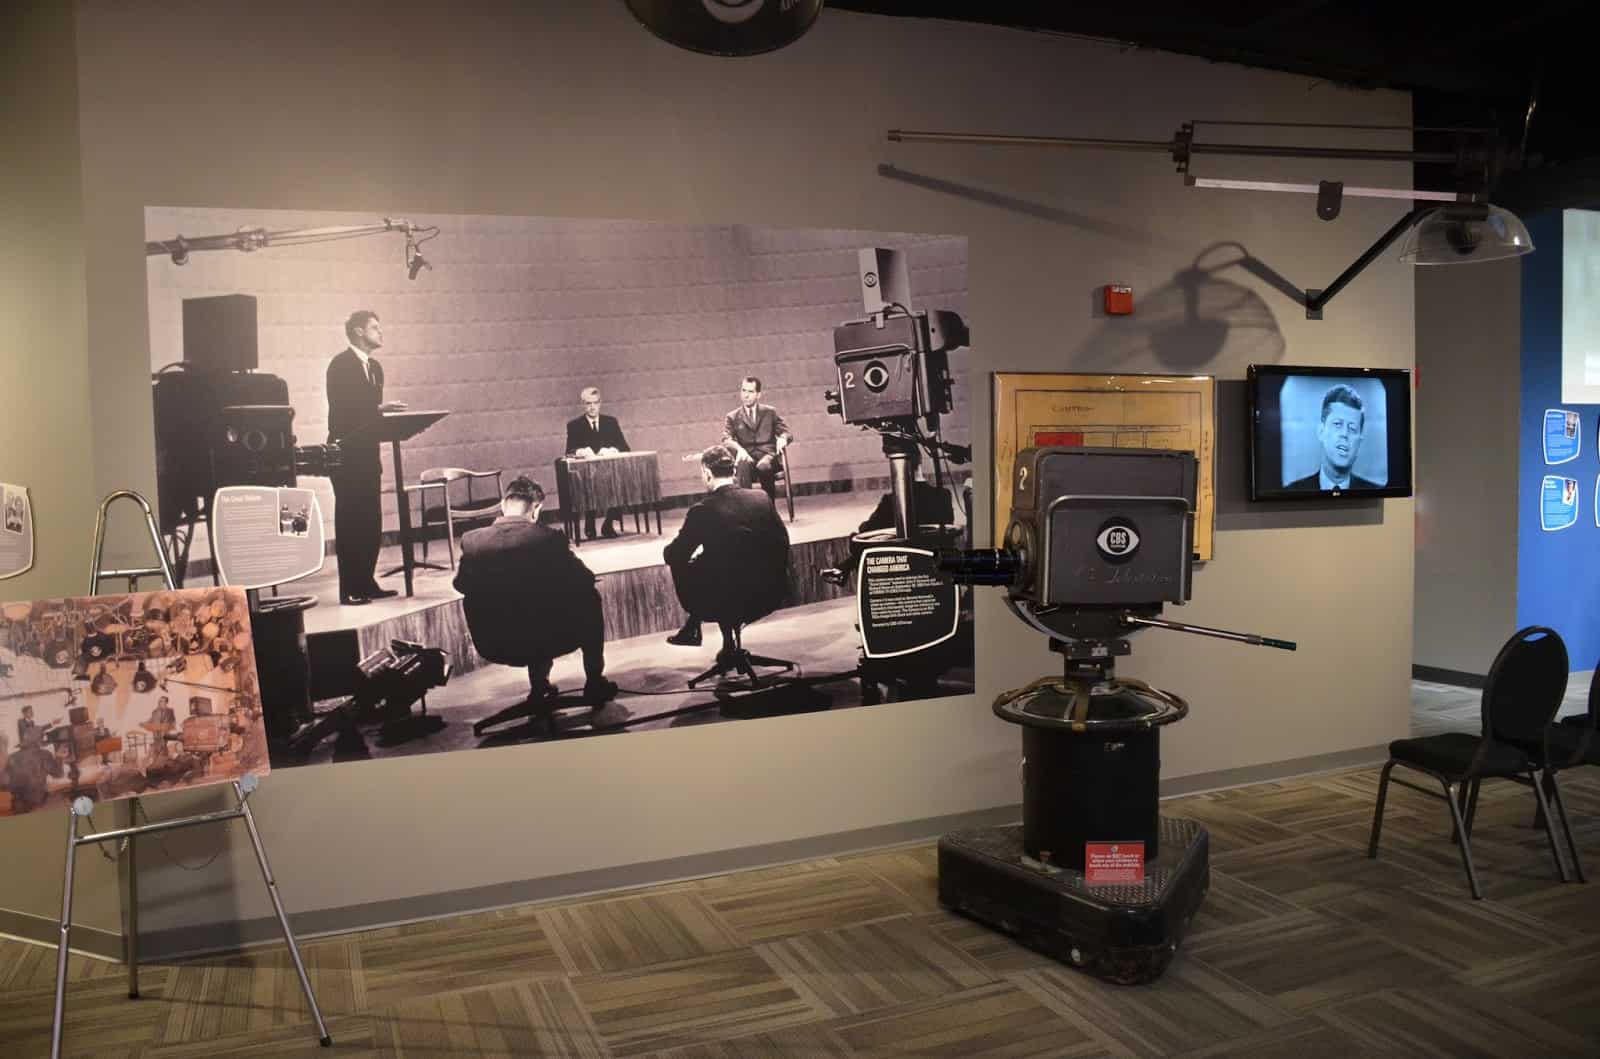 Kennedy-Nixon Debate camera at the Museum of Broadcast Communications in Chicago, Illinois